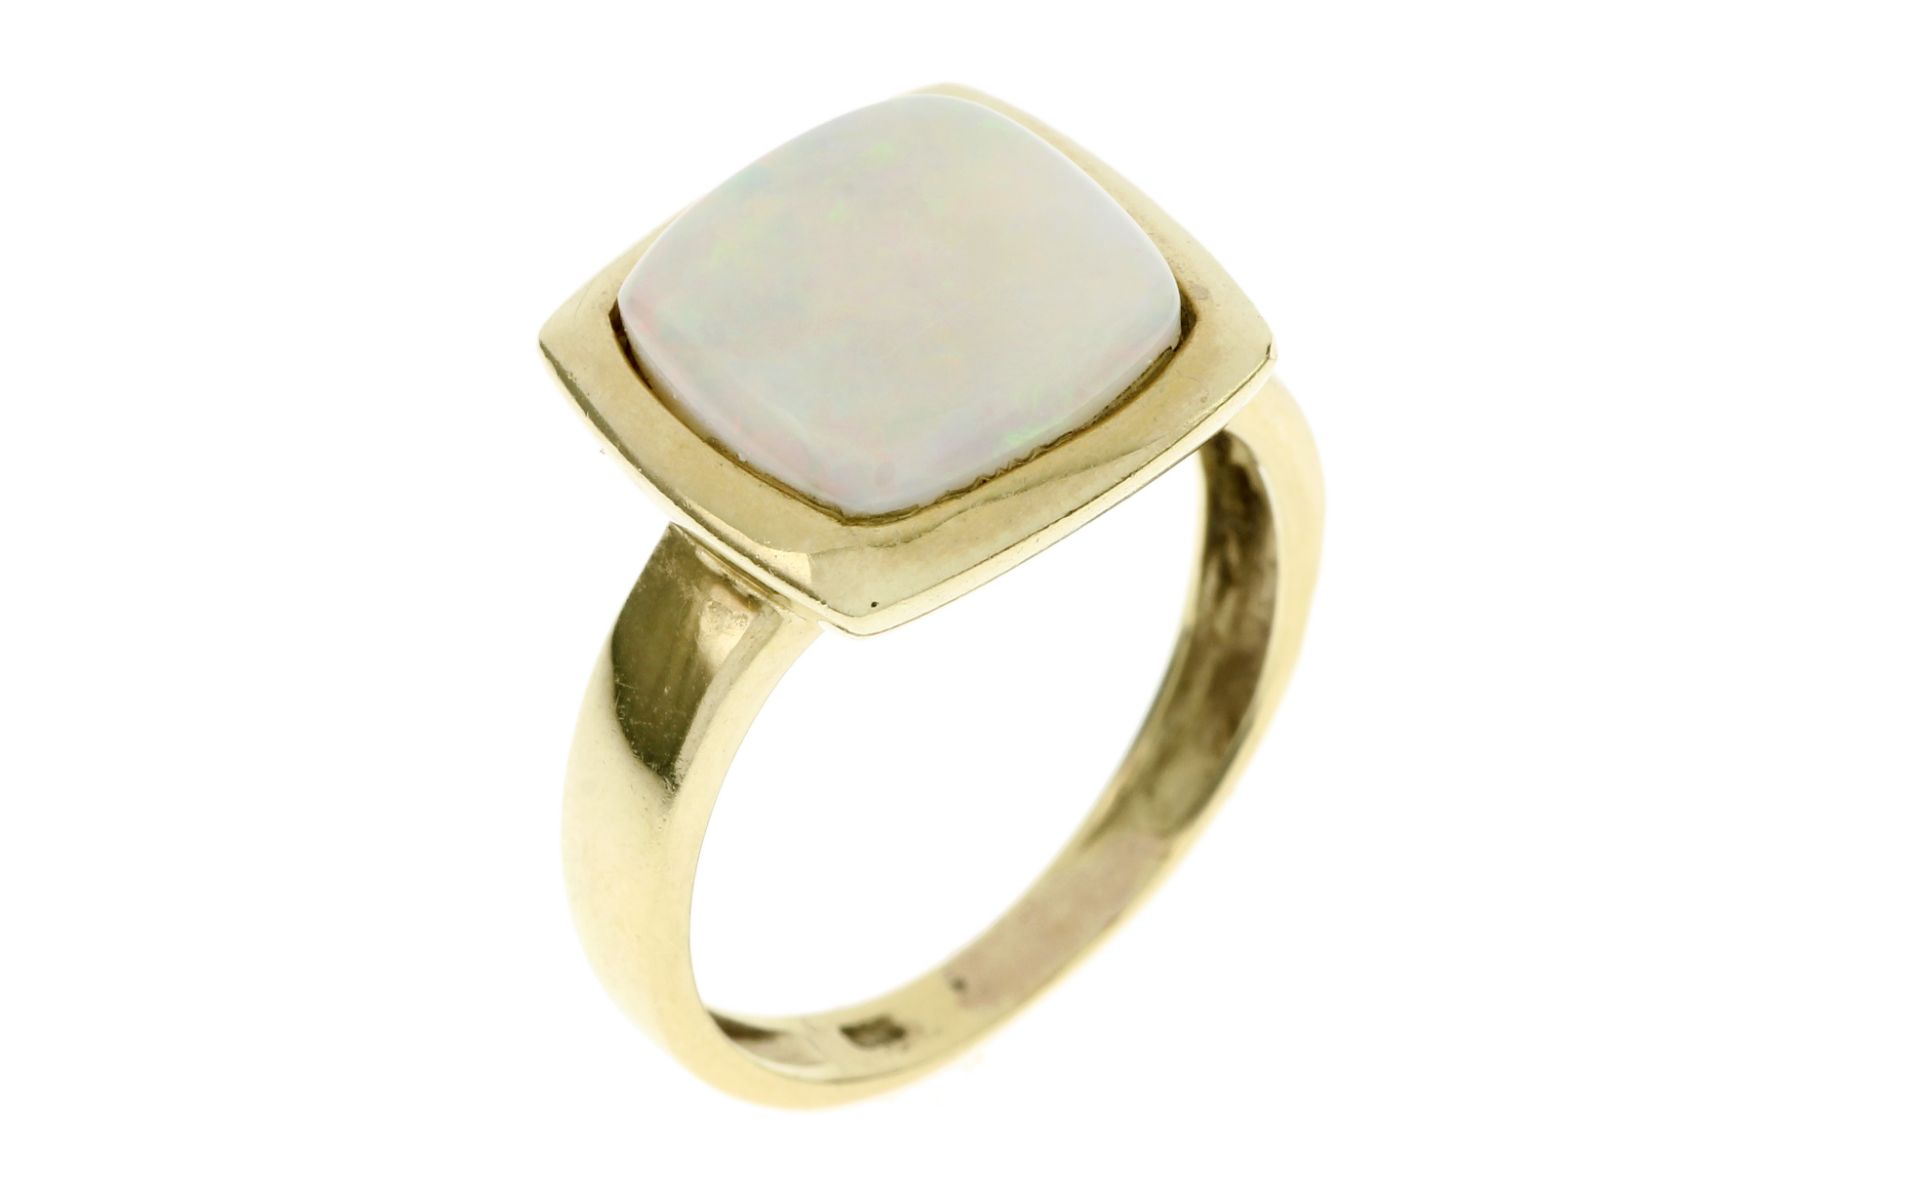 Ring 4.26g 585/- Gelbgold mit Opal. Ringgroesse ca. 50